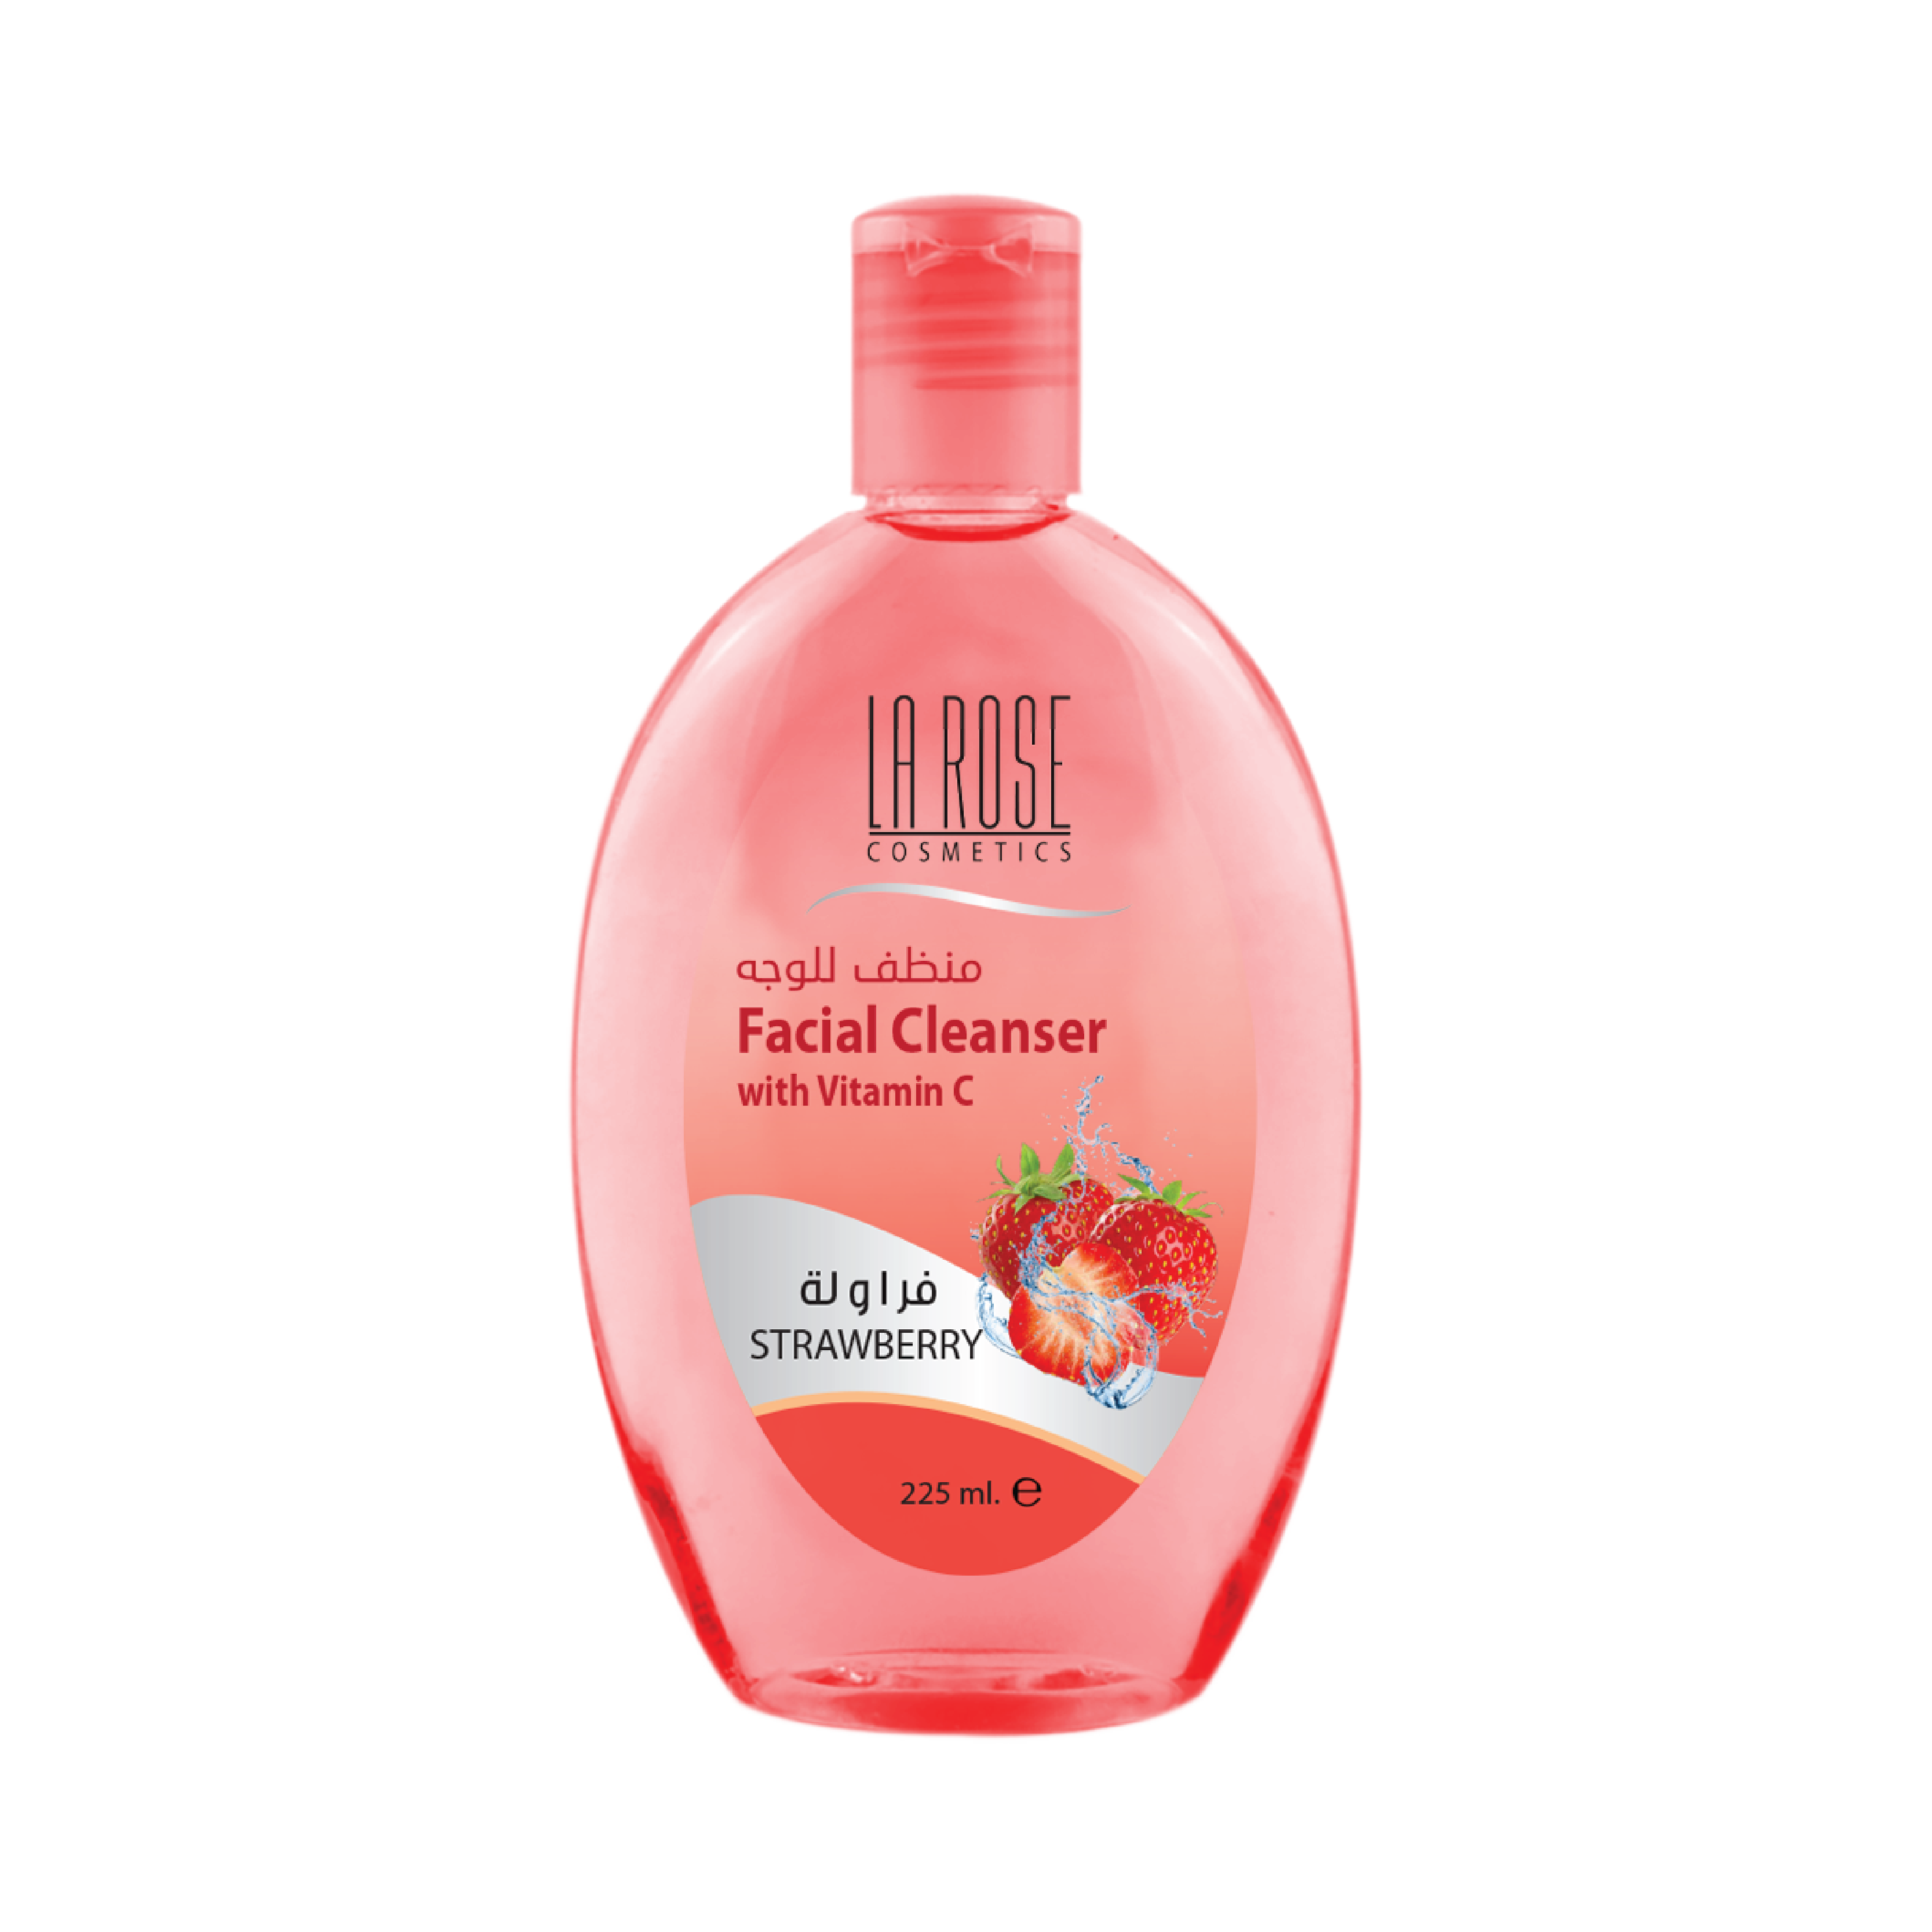 Indulge in La Rose Strawberry Facial Cleanser